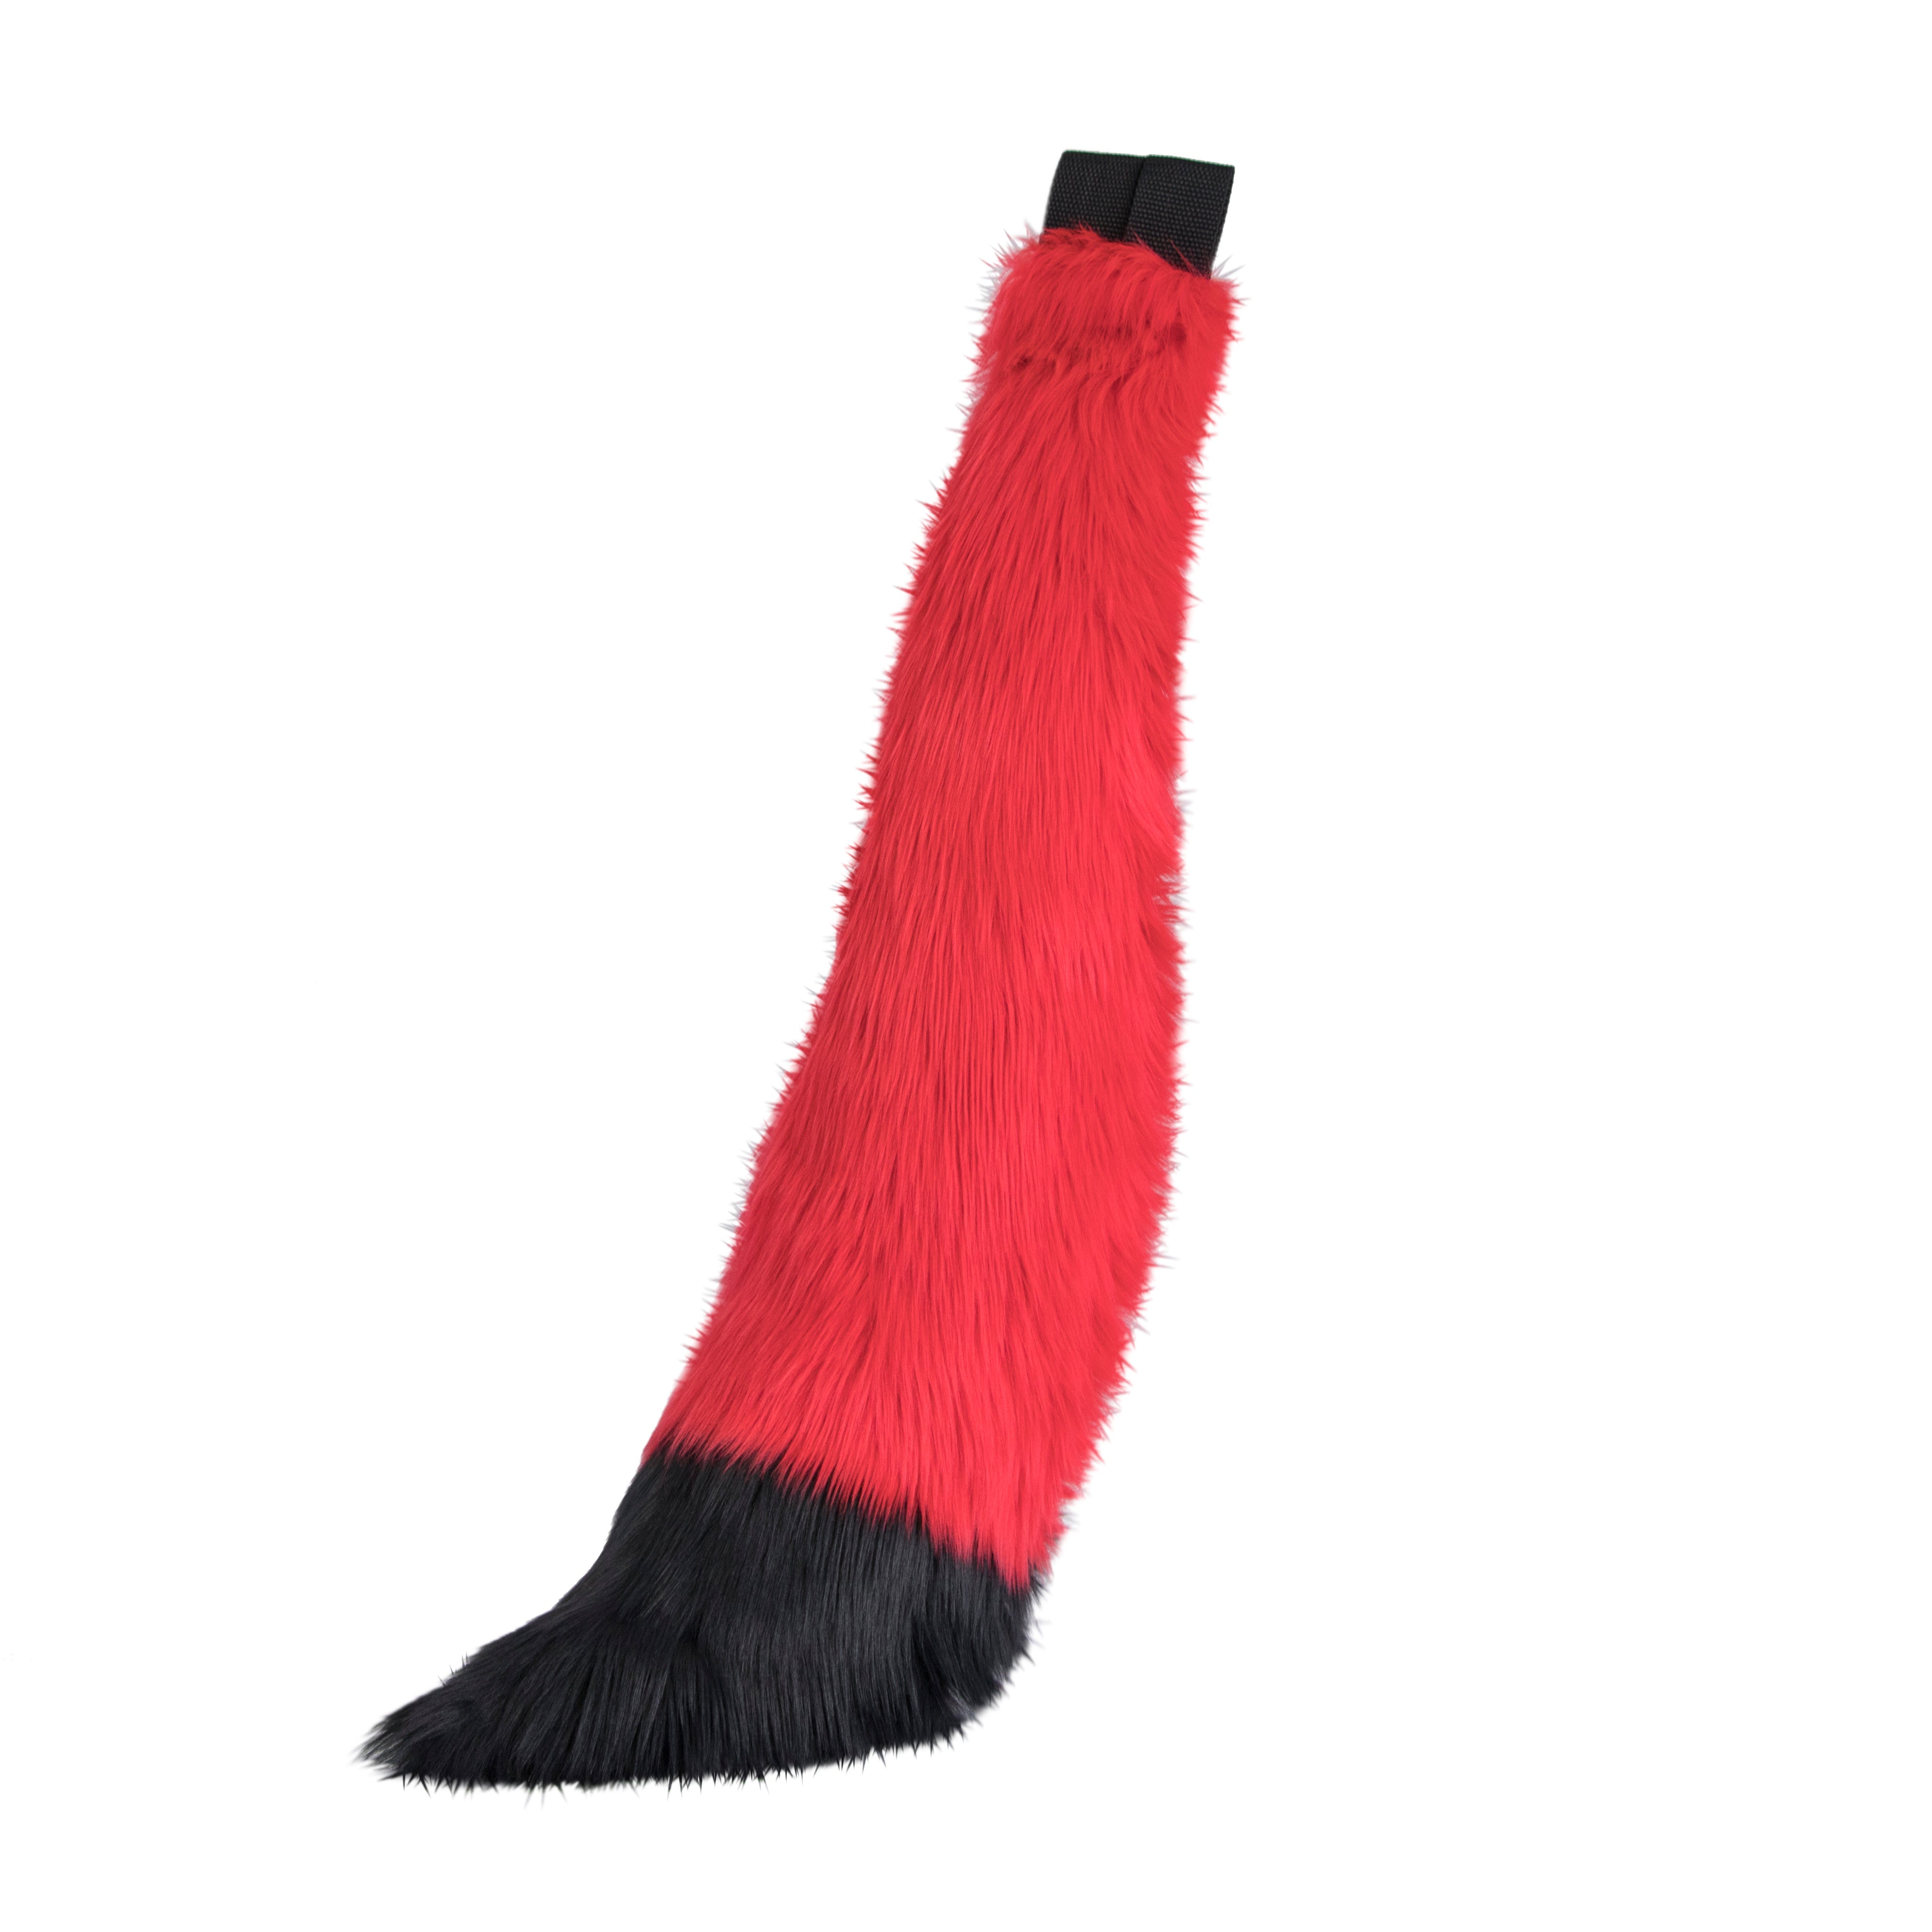 red and black Pawstar furry fox tail made from vegan friendly faux fur. Great for halloween, cosplay and partial fursuits.